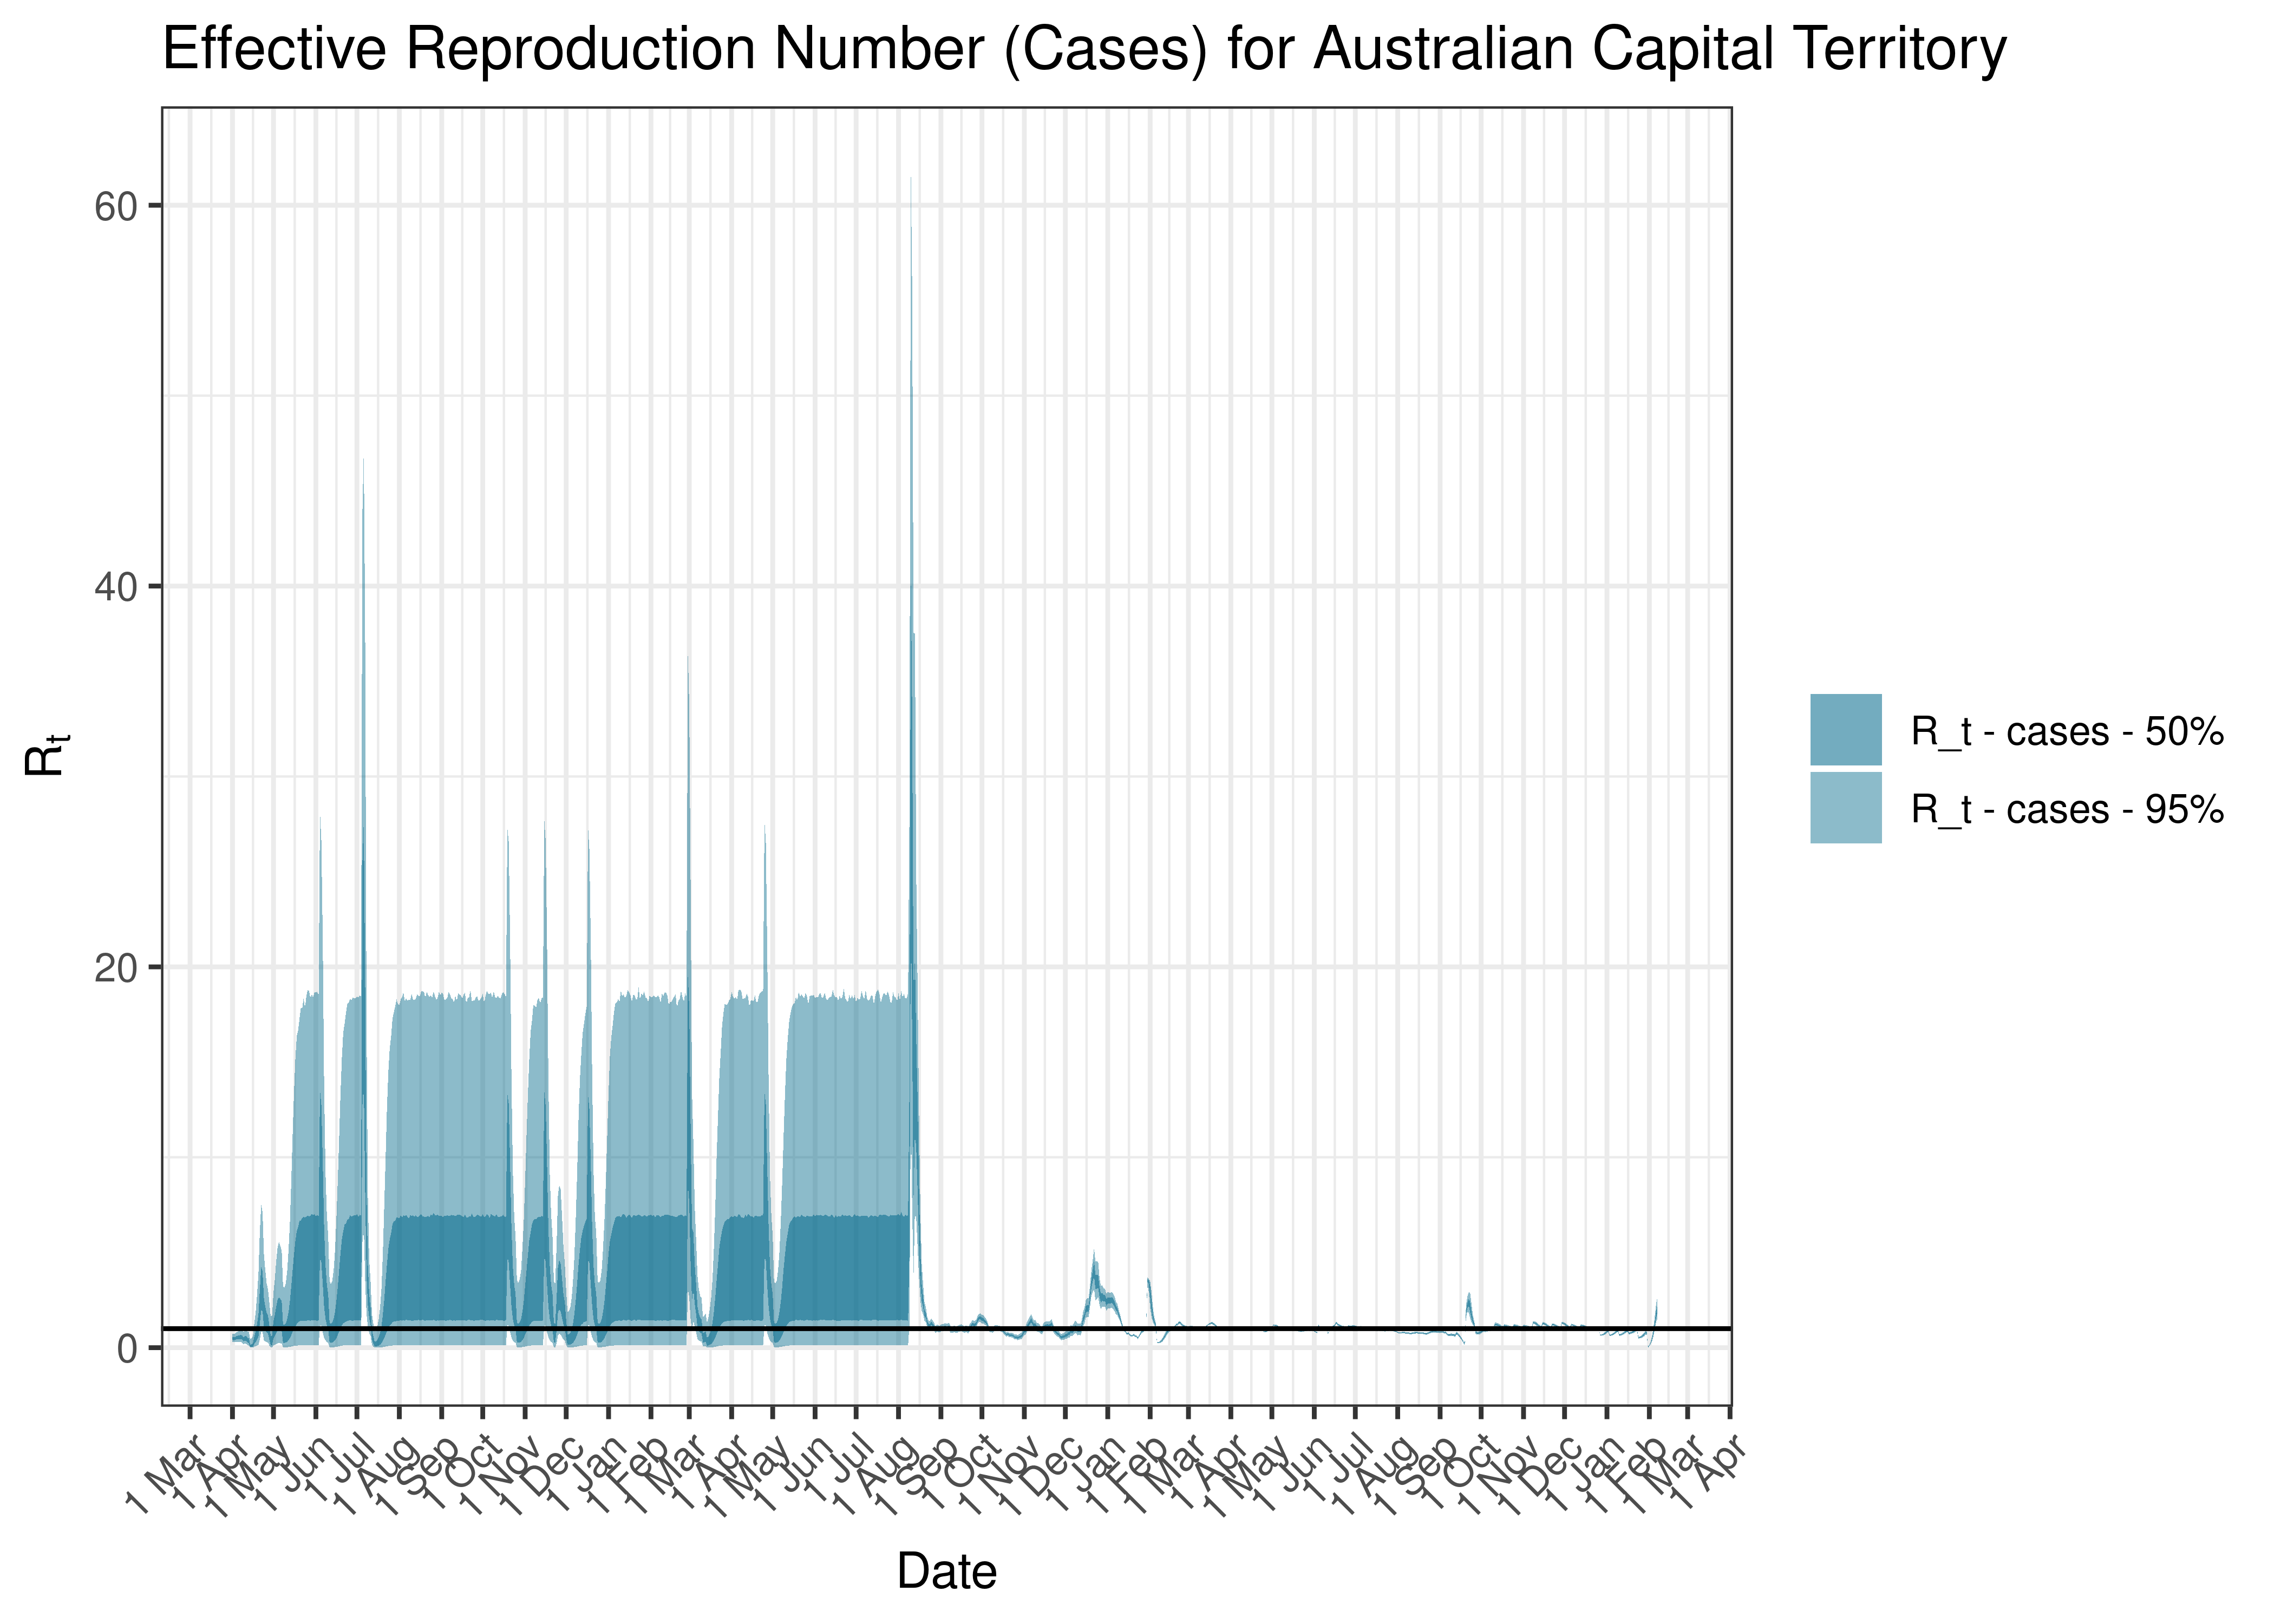 Estimated Effective Reproduction Number Based on Cases for Australian Capital Territory since 1 April 2020